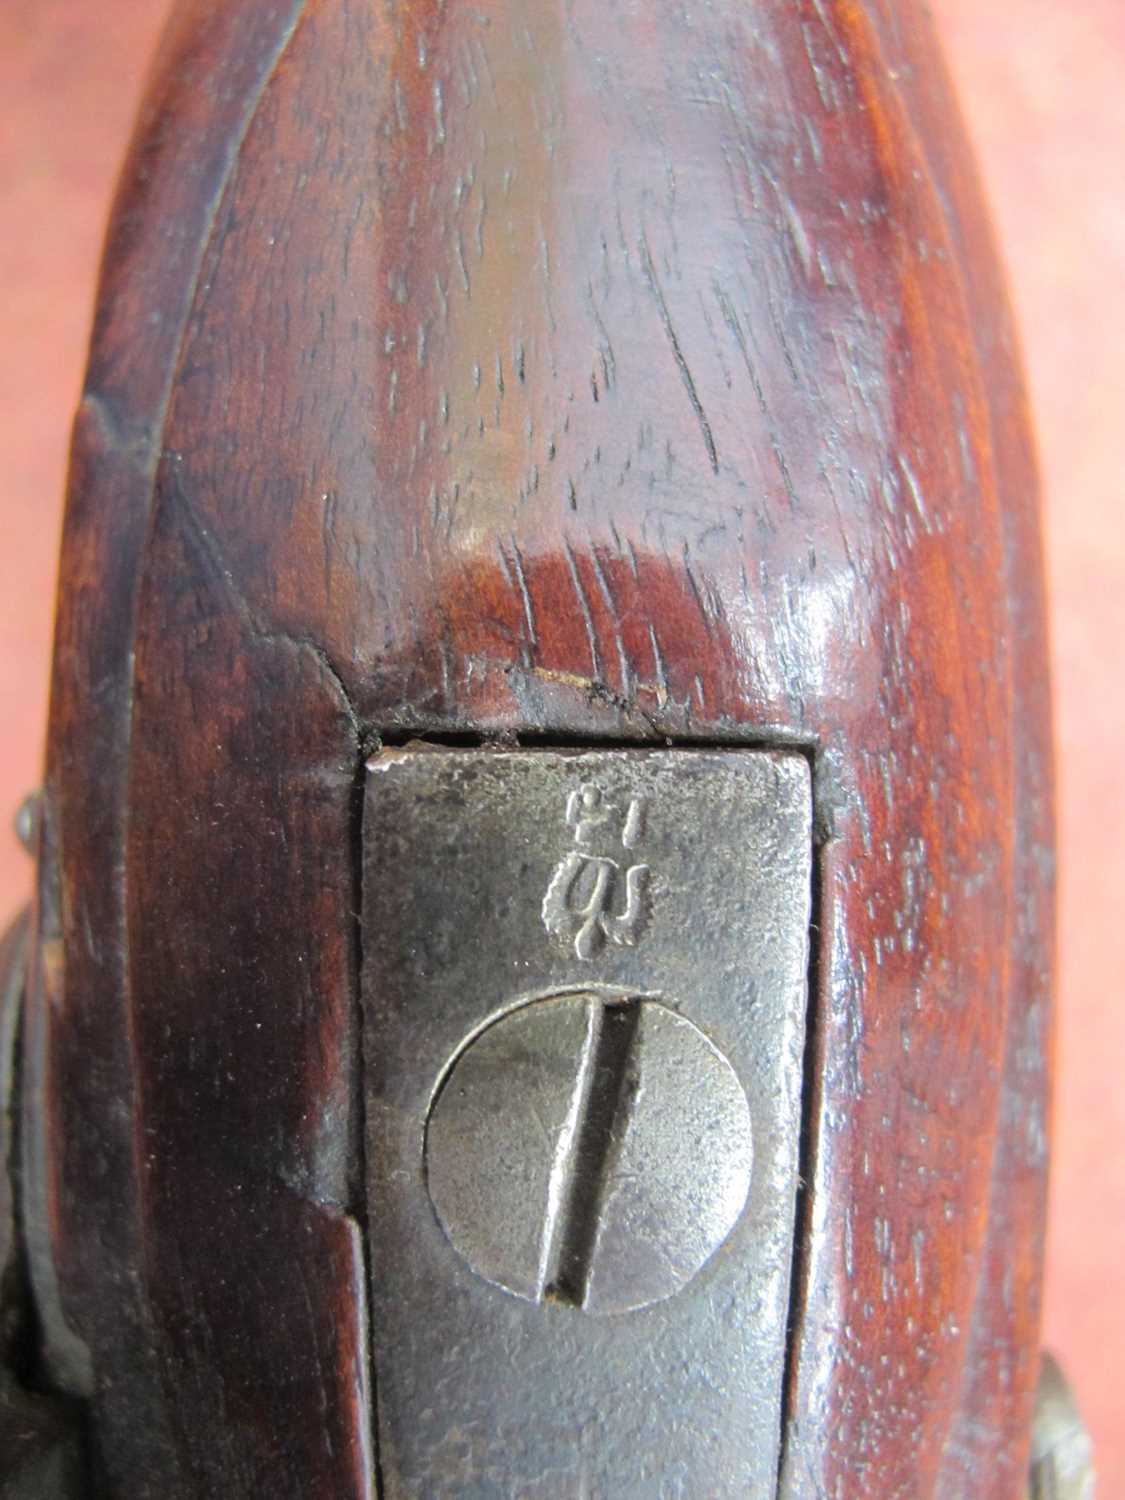 British India Pattern Circa 1810 'Brown Bess' Flintlock Musket, marked 'Tower' with 'GR' crown - Image 17 of 17